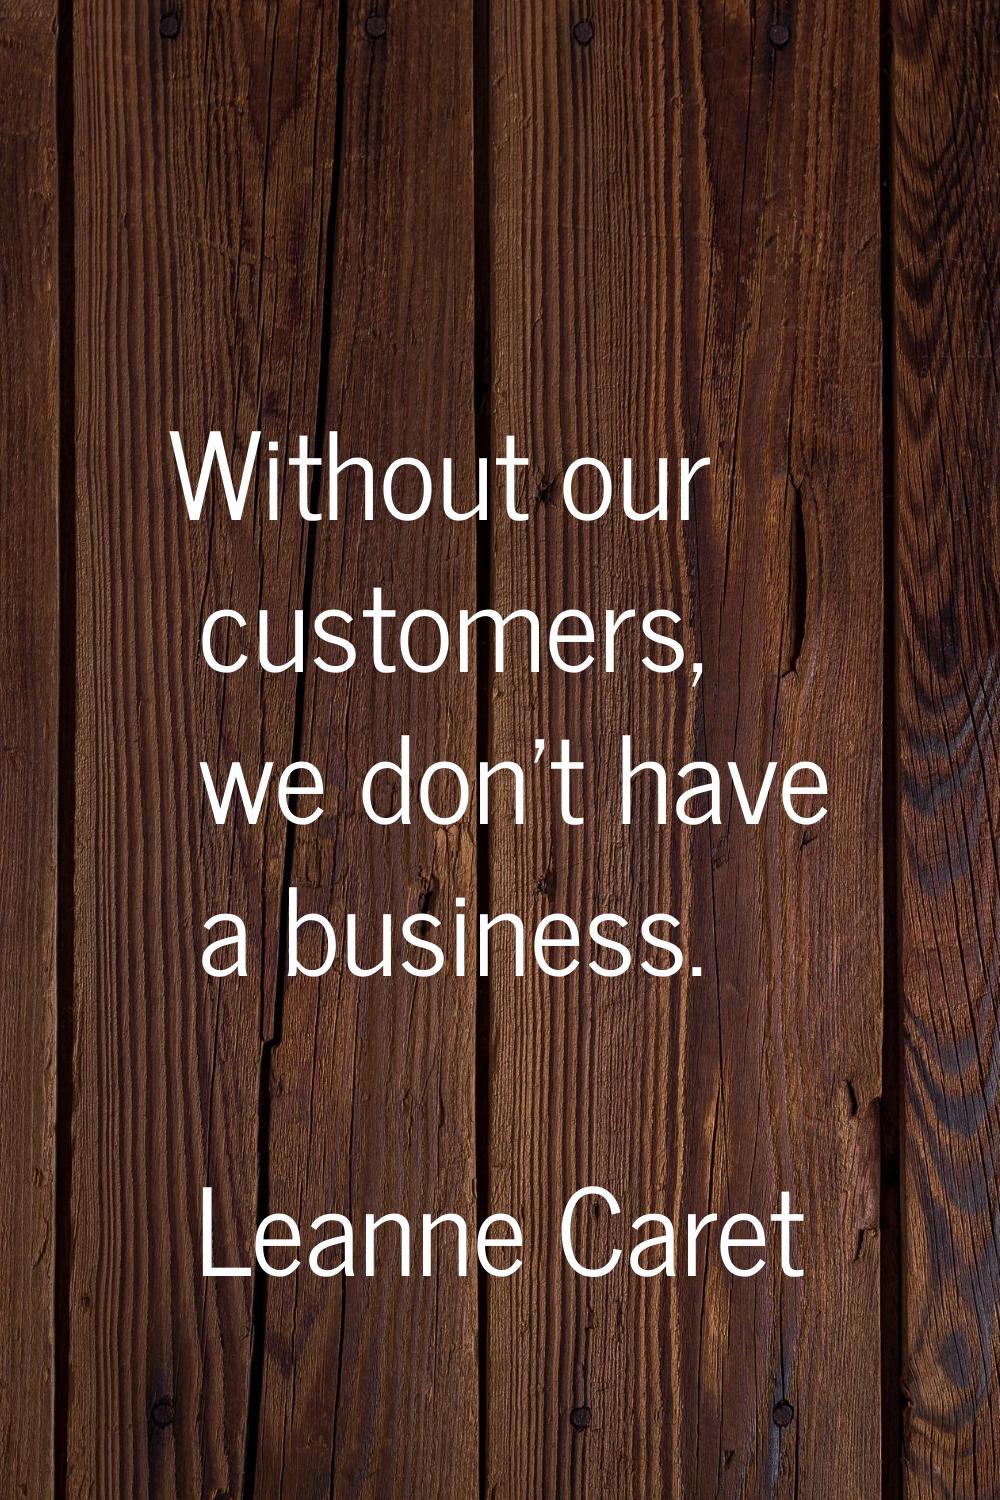 Without our customers, we don't have a business.